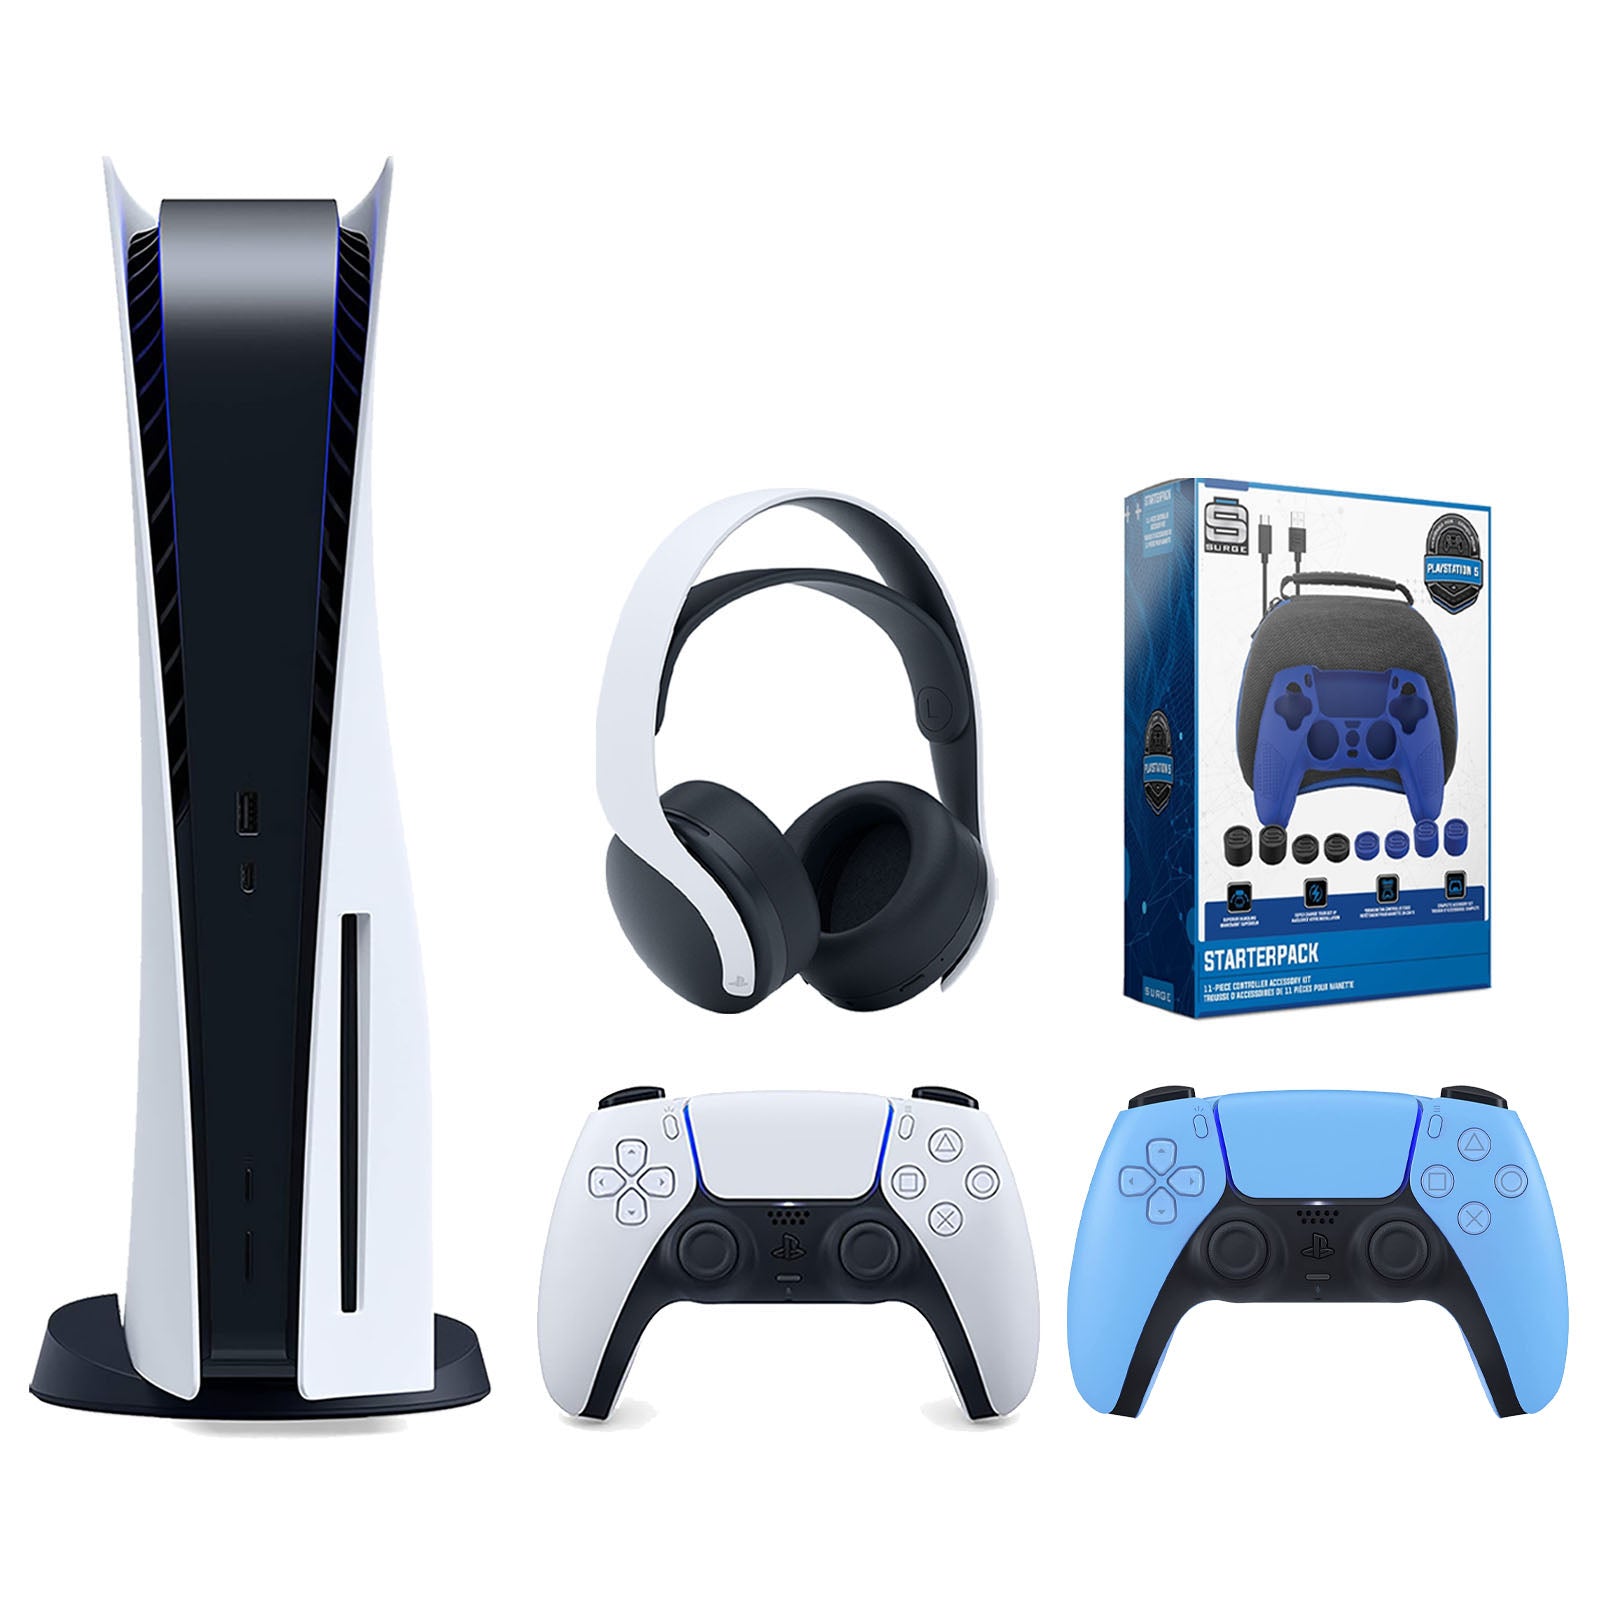 Sony Playstation 5 Disc Version Console with Extra Blue Controller, White PULSE 3D Headset and Surge Pro Gamer Starter Pack 11-Piece Accessory Bundle - Pro-Distributing